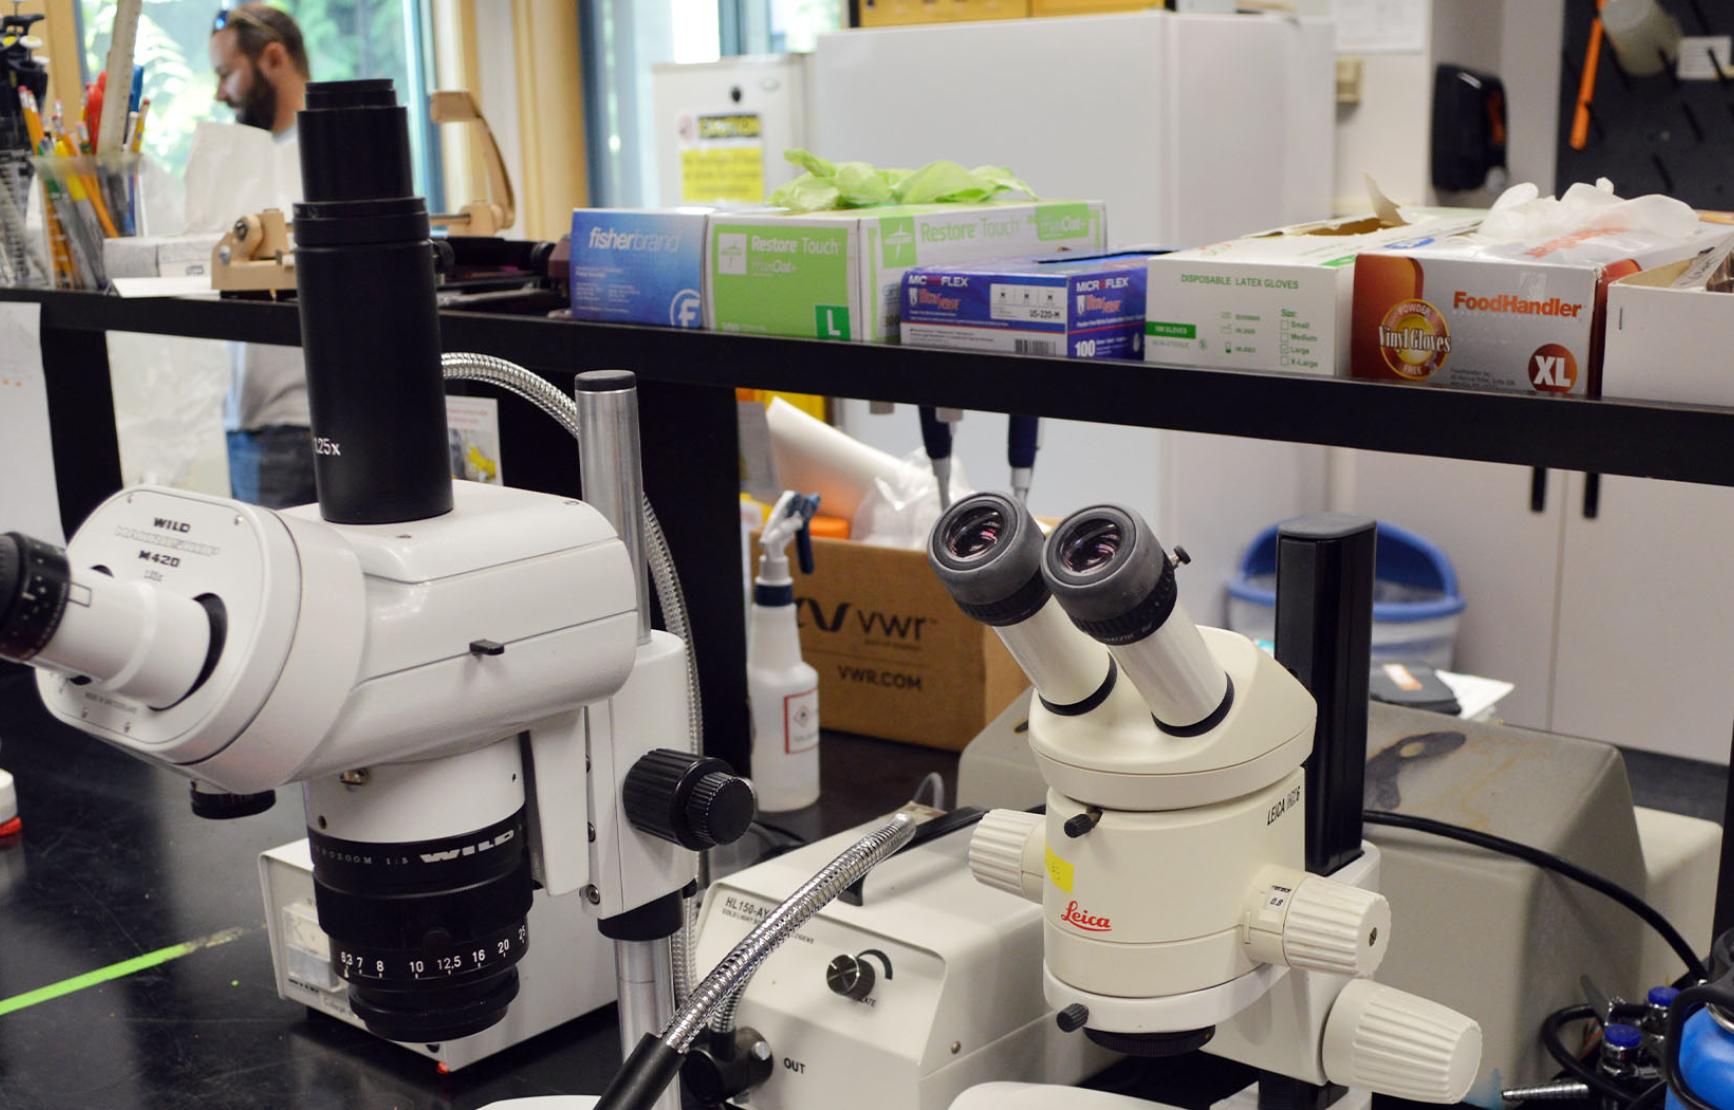 Microscopes and equipment